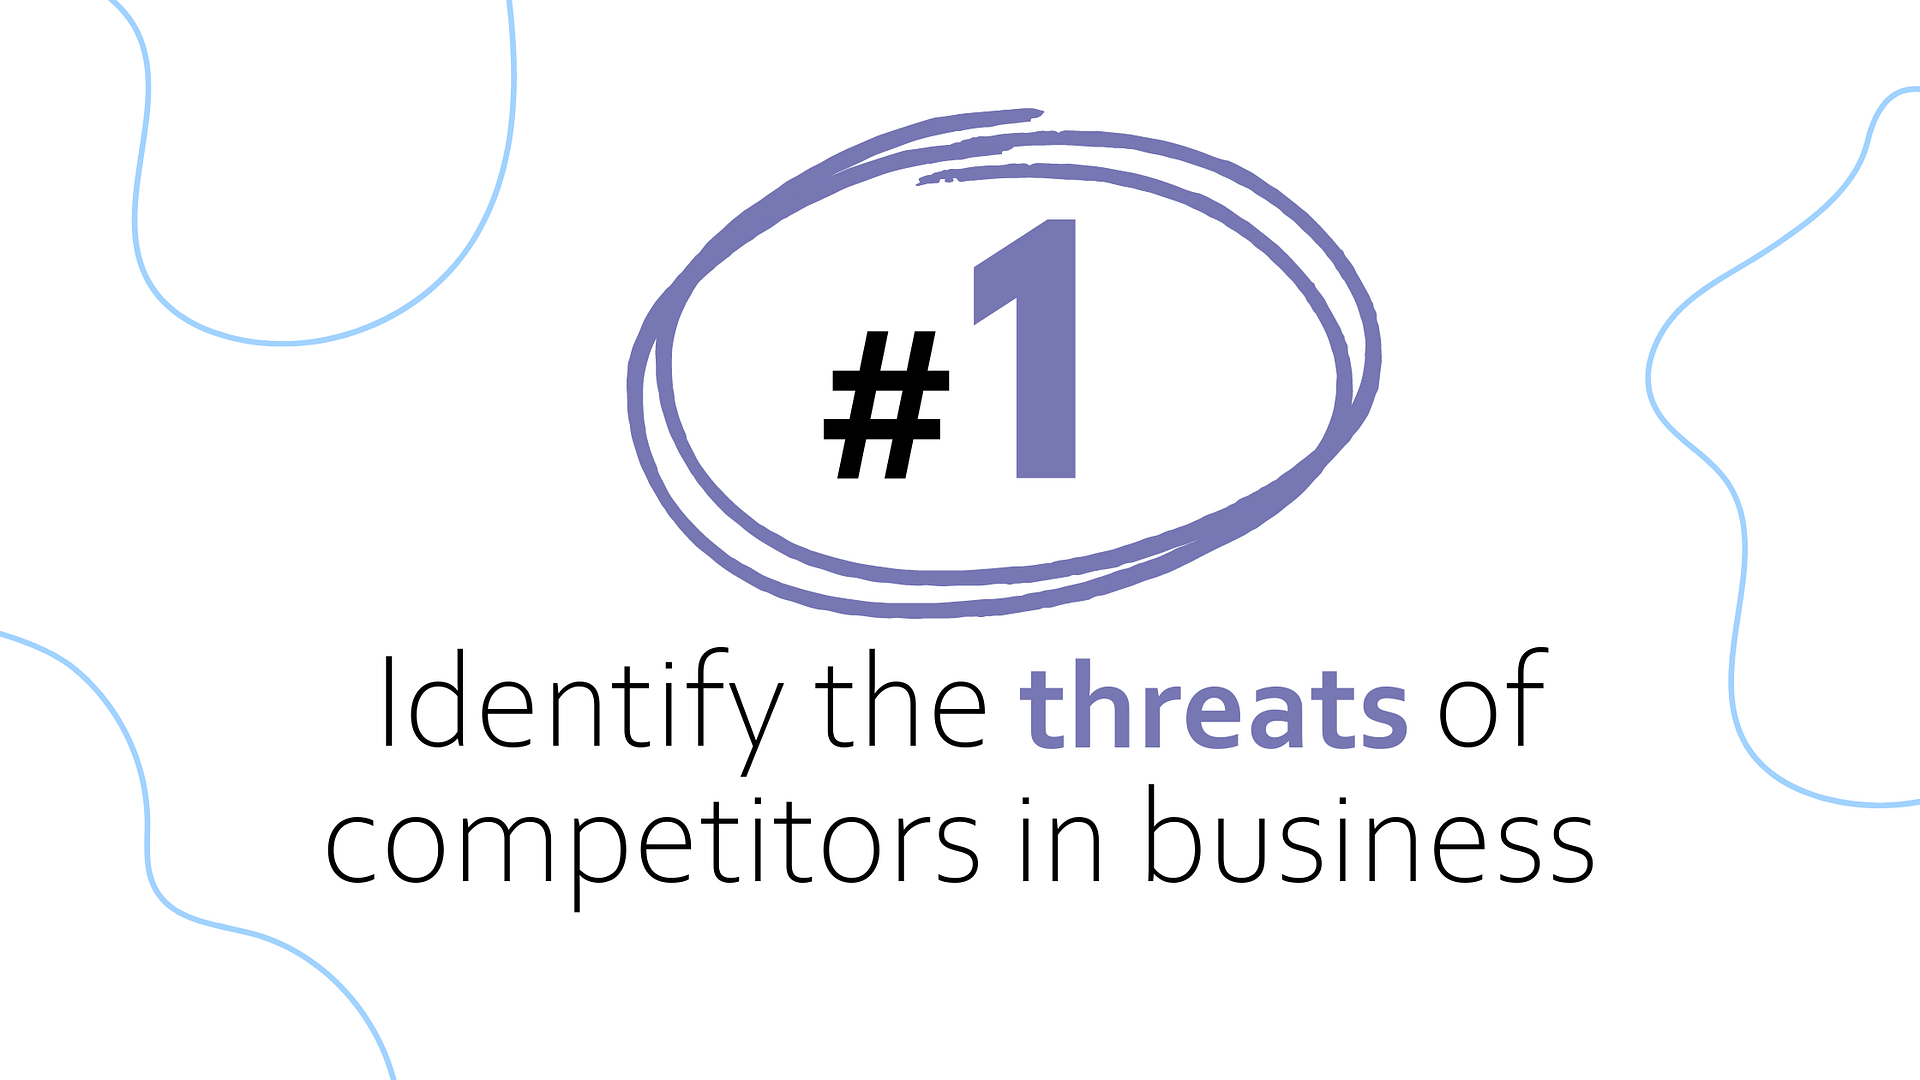 Identify the threats of competitors in business - competitor SWOT analysis (Step 1)